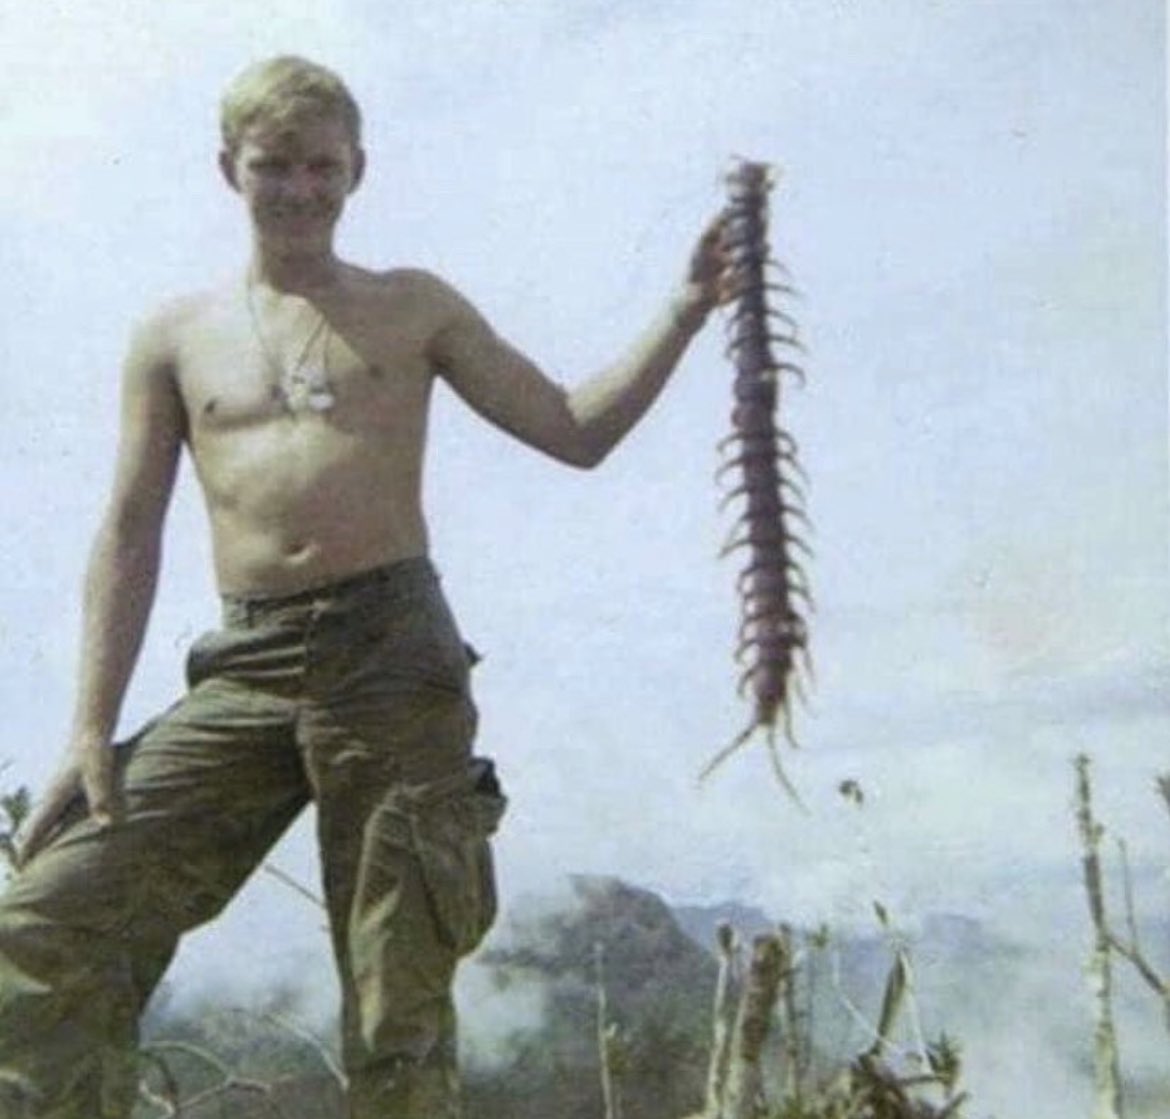 In 1967, during the Vietnam War, an American soldier held up a Scolopendra subspinipes, a species of giant centipede found throughout Asia. The centipede preys on insects like spiders and scorpions but can overpower small mammals or reptiles. It uses its venomous jaws and other…